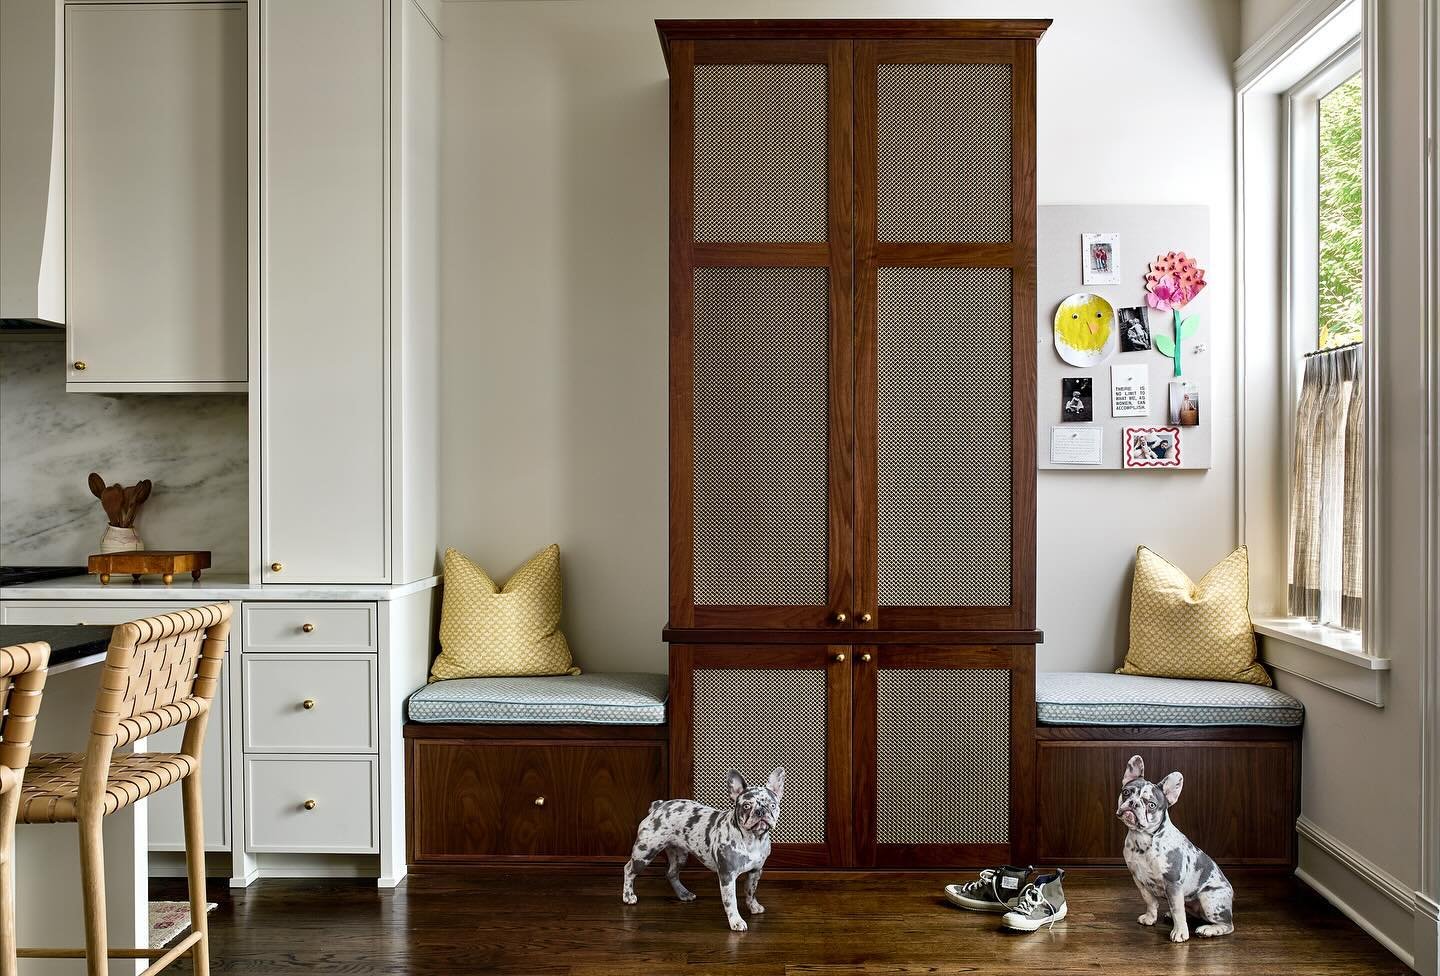 What to do when your home doesn&rsquo;t have a mudroom? Create one that blends in and stands out. A duo of decadent frenchies also helps 🤓 Swipe for the before. 
.
.
.
📷 @stacyzaringoldberg 
👷&zwj;♂️ @gardnerbuilt 
📐 @mortarandthatch 
🌸 @kincoll